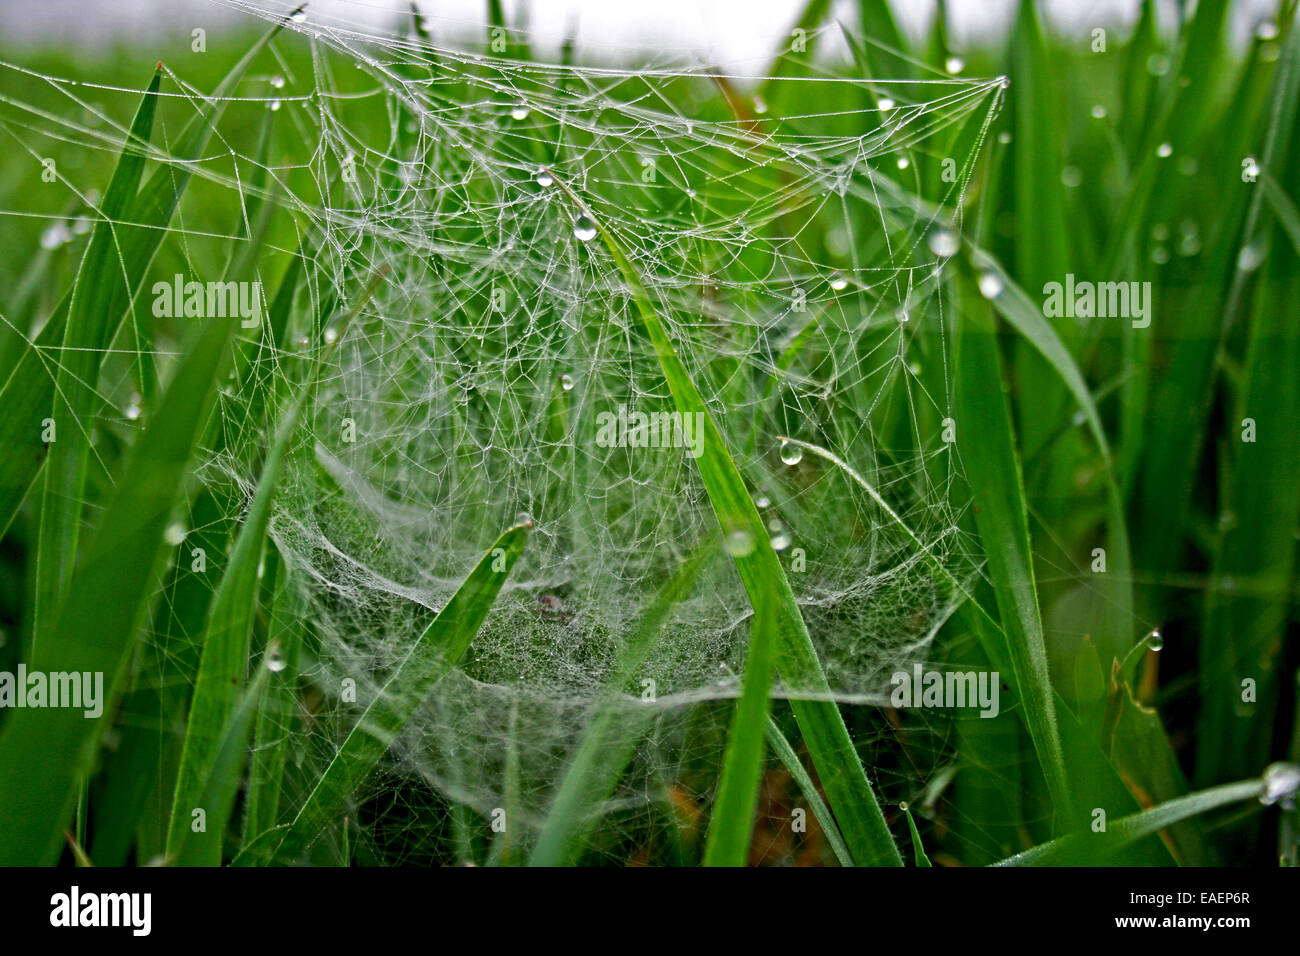 Spider web between the grass. Stock Photo